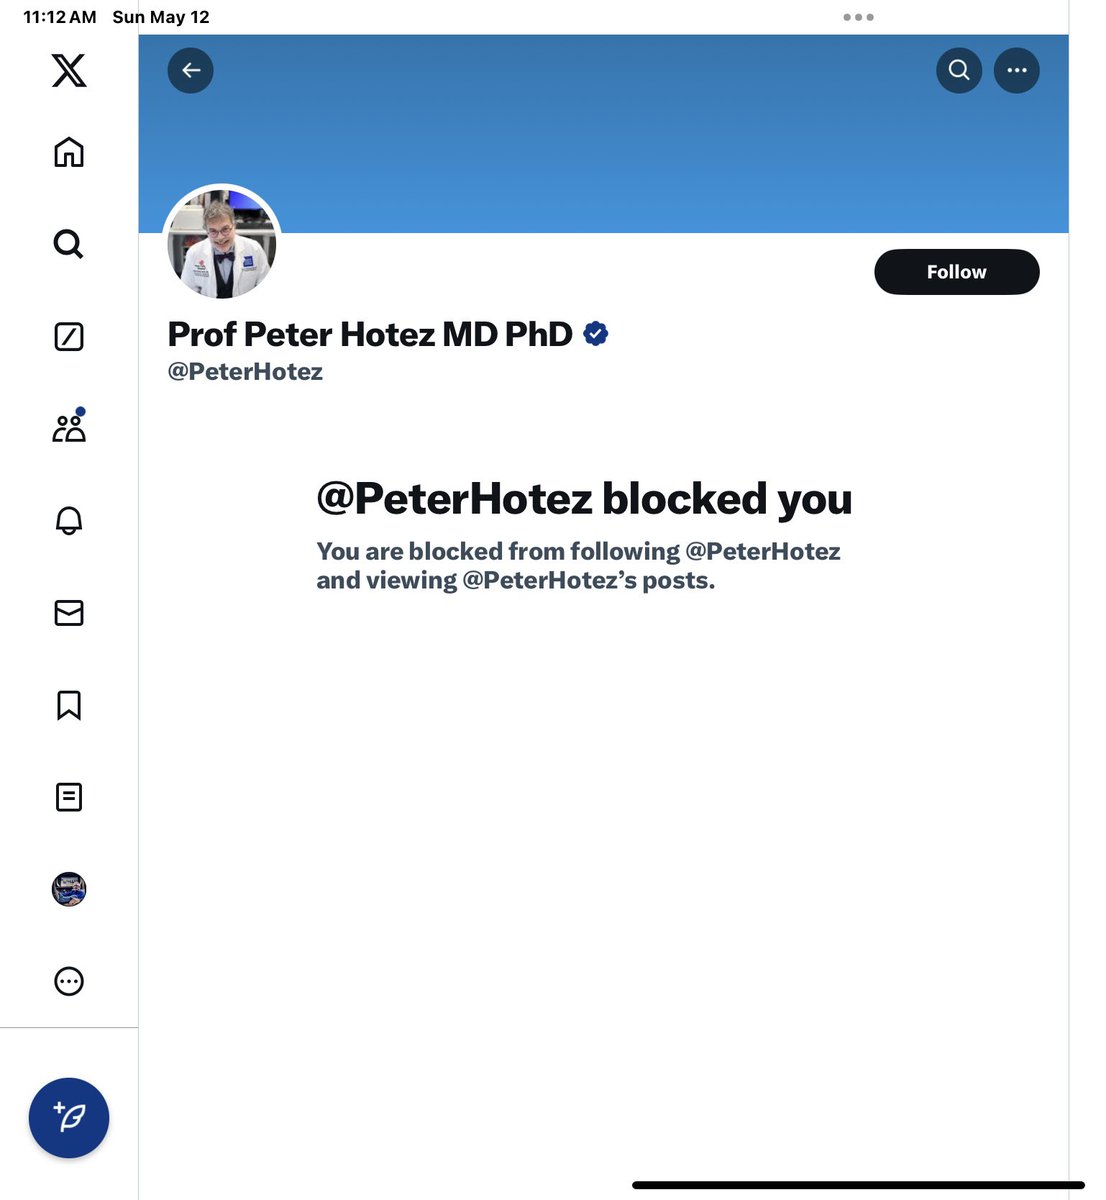 For asking questions, I got blocked by the nation’s top COVID scientists.   I got censored, warned and banned by FB and Twitter during COVID.   When did questions and free speech get shunned by science and the press?